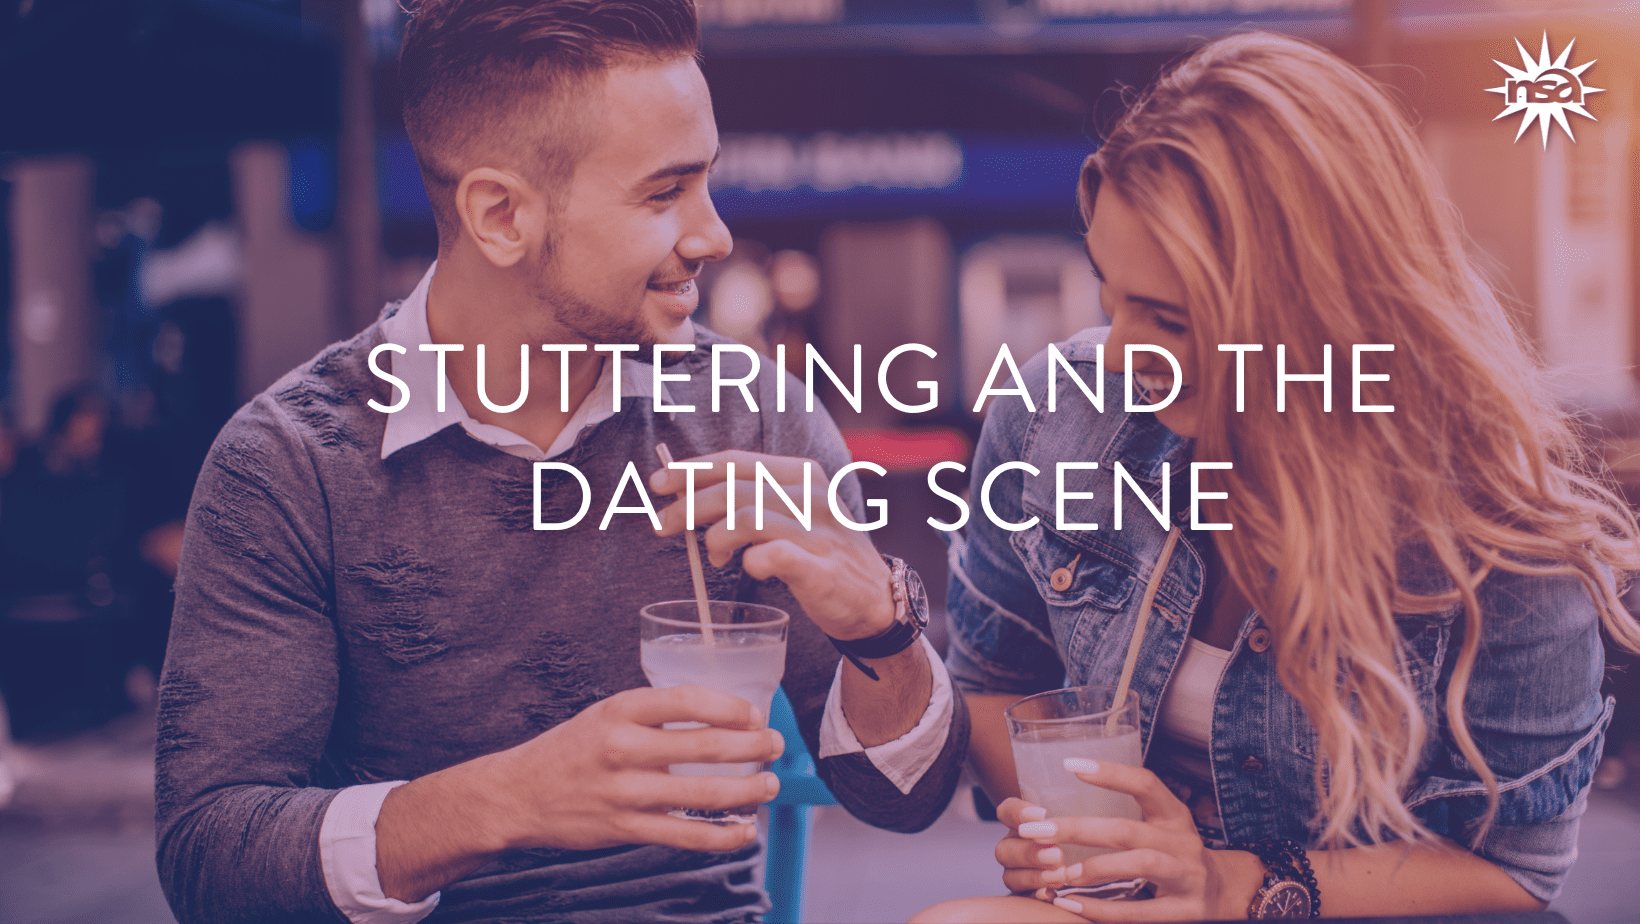 NSA Connects - Stuttering and the Dating Scene